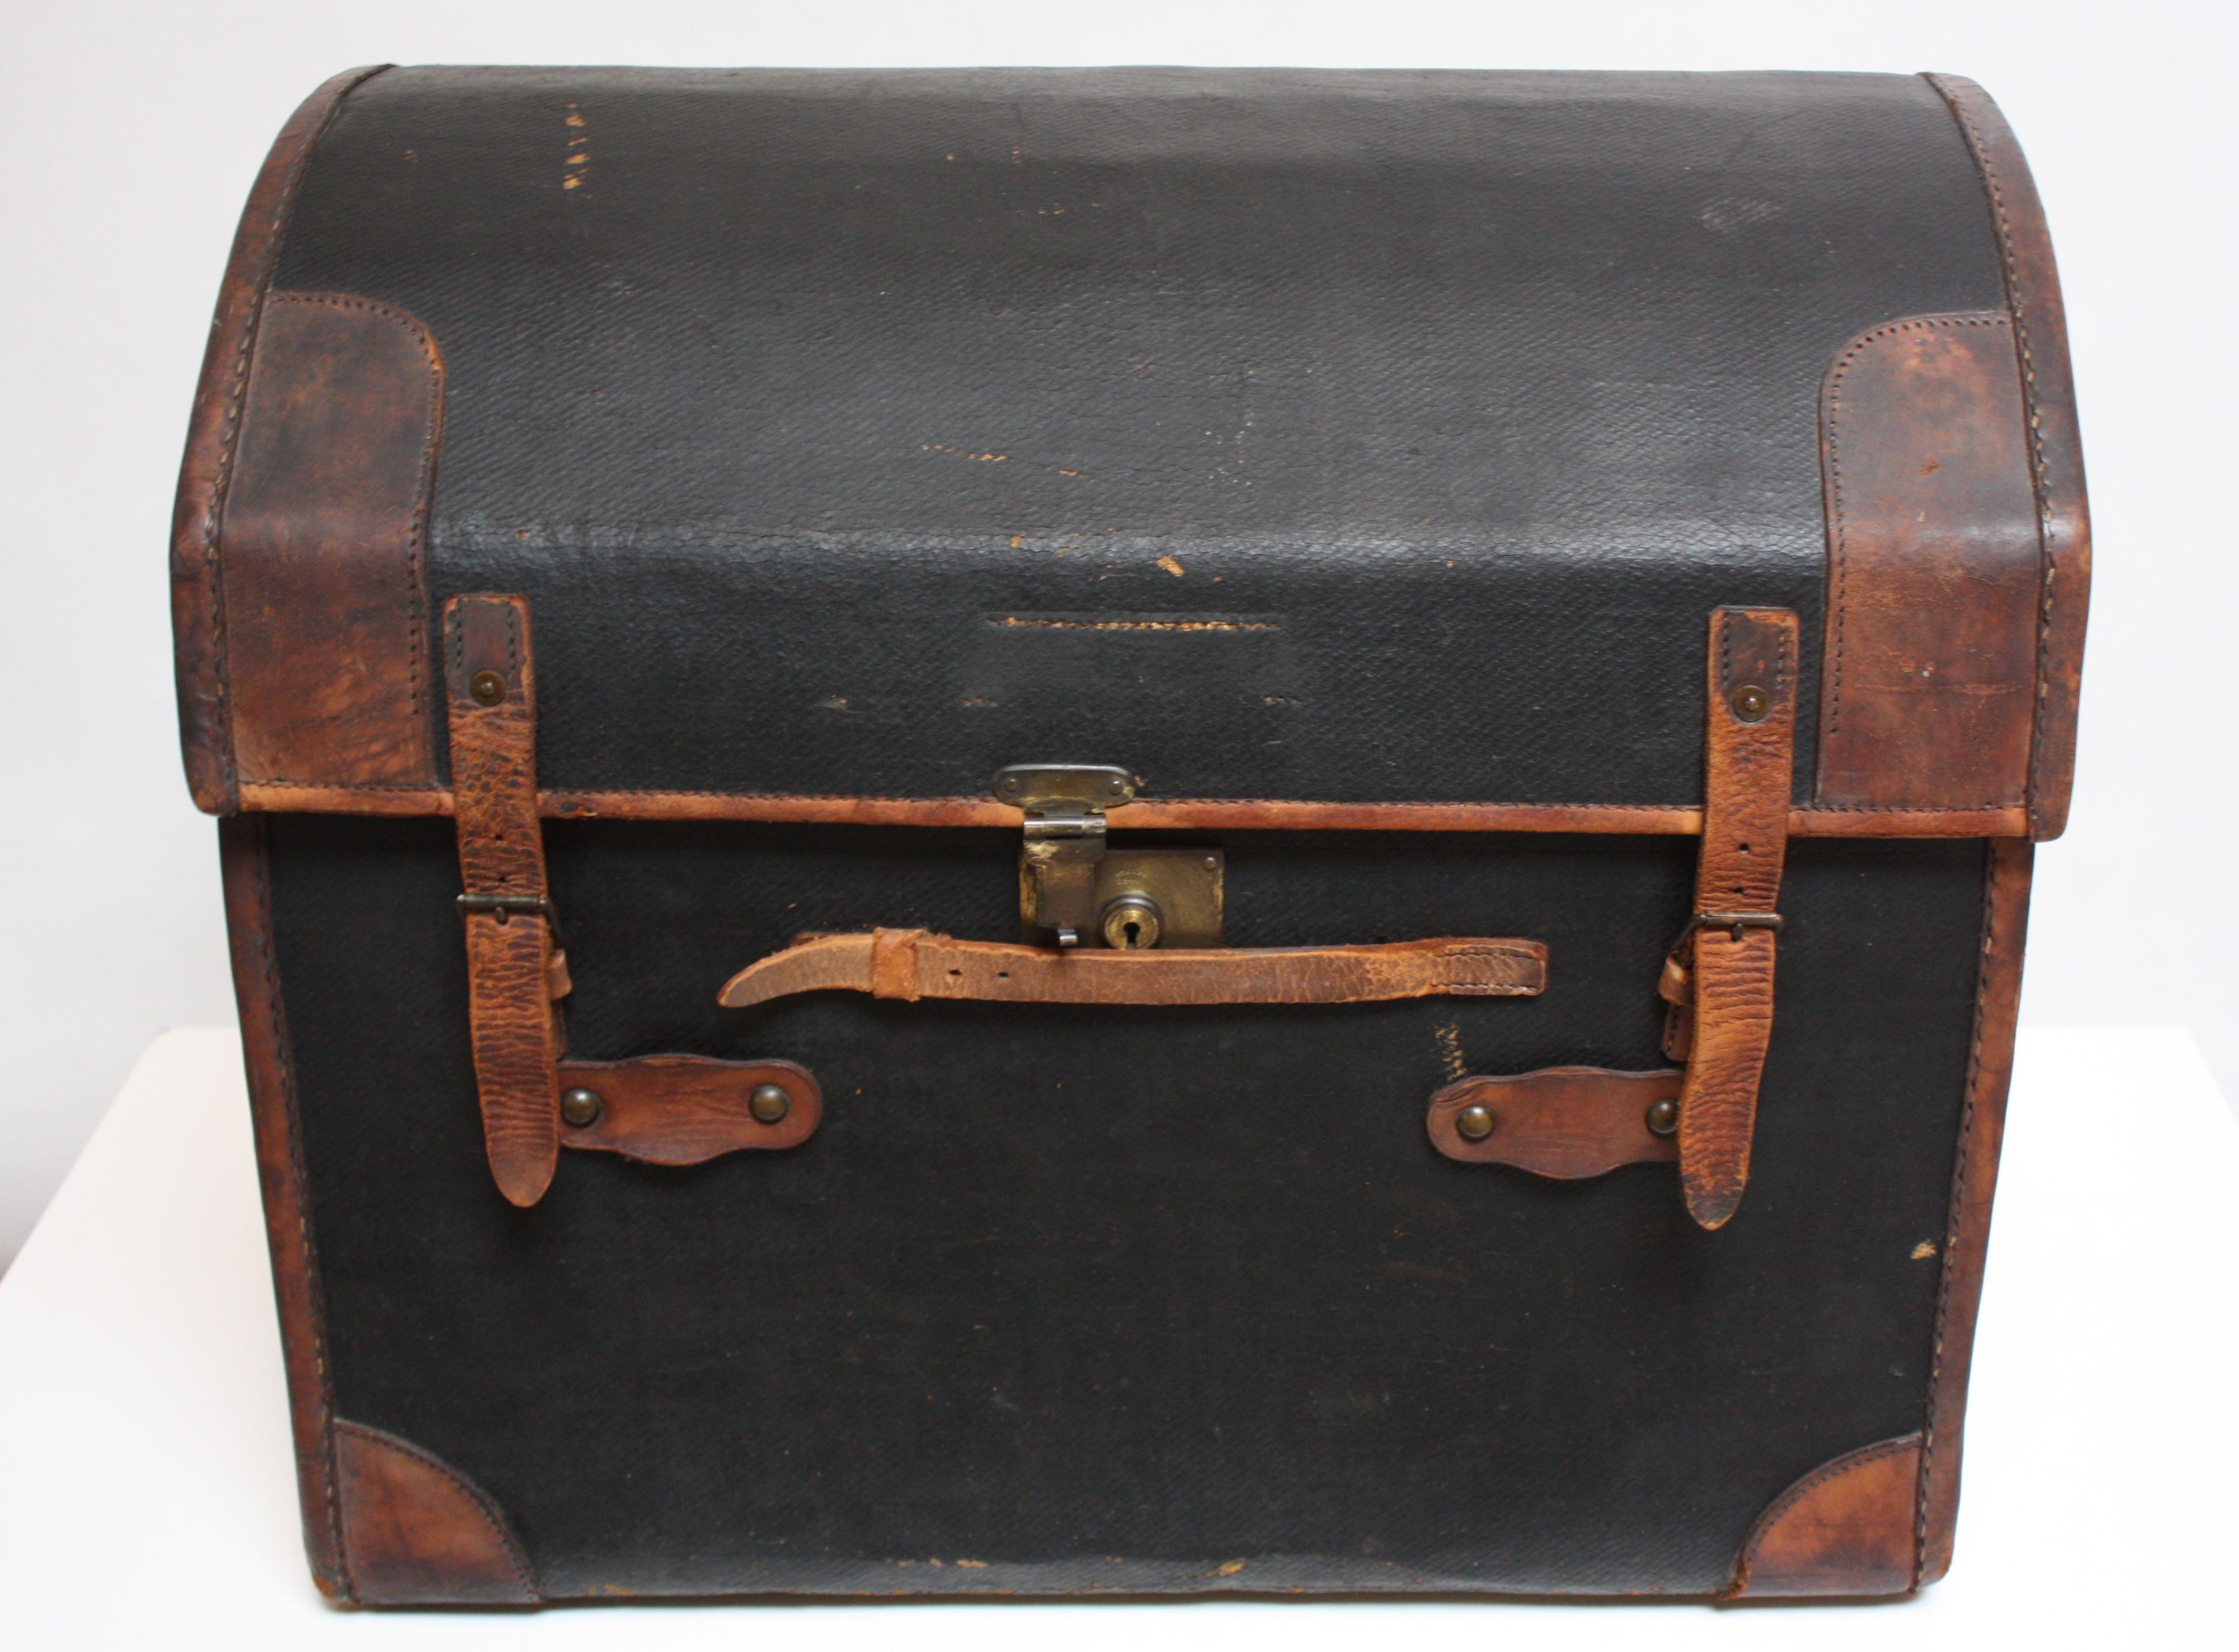 American Vintage Folk Art Dome Top Leather and Canvas Steamer Trunk Initialed 'H.K.'